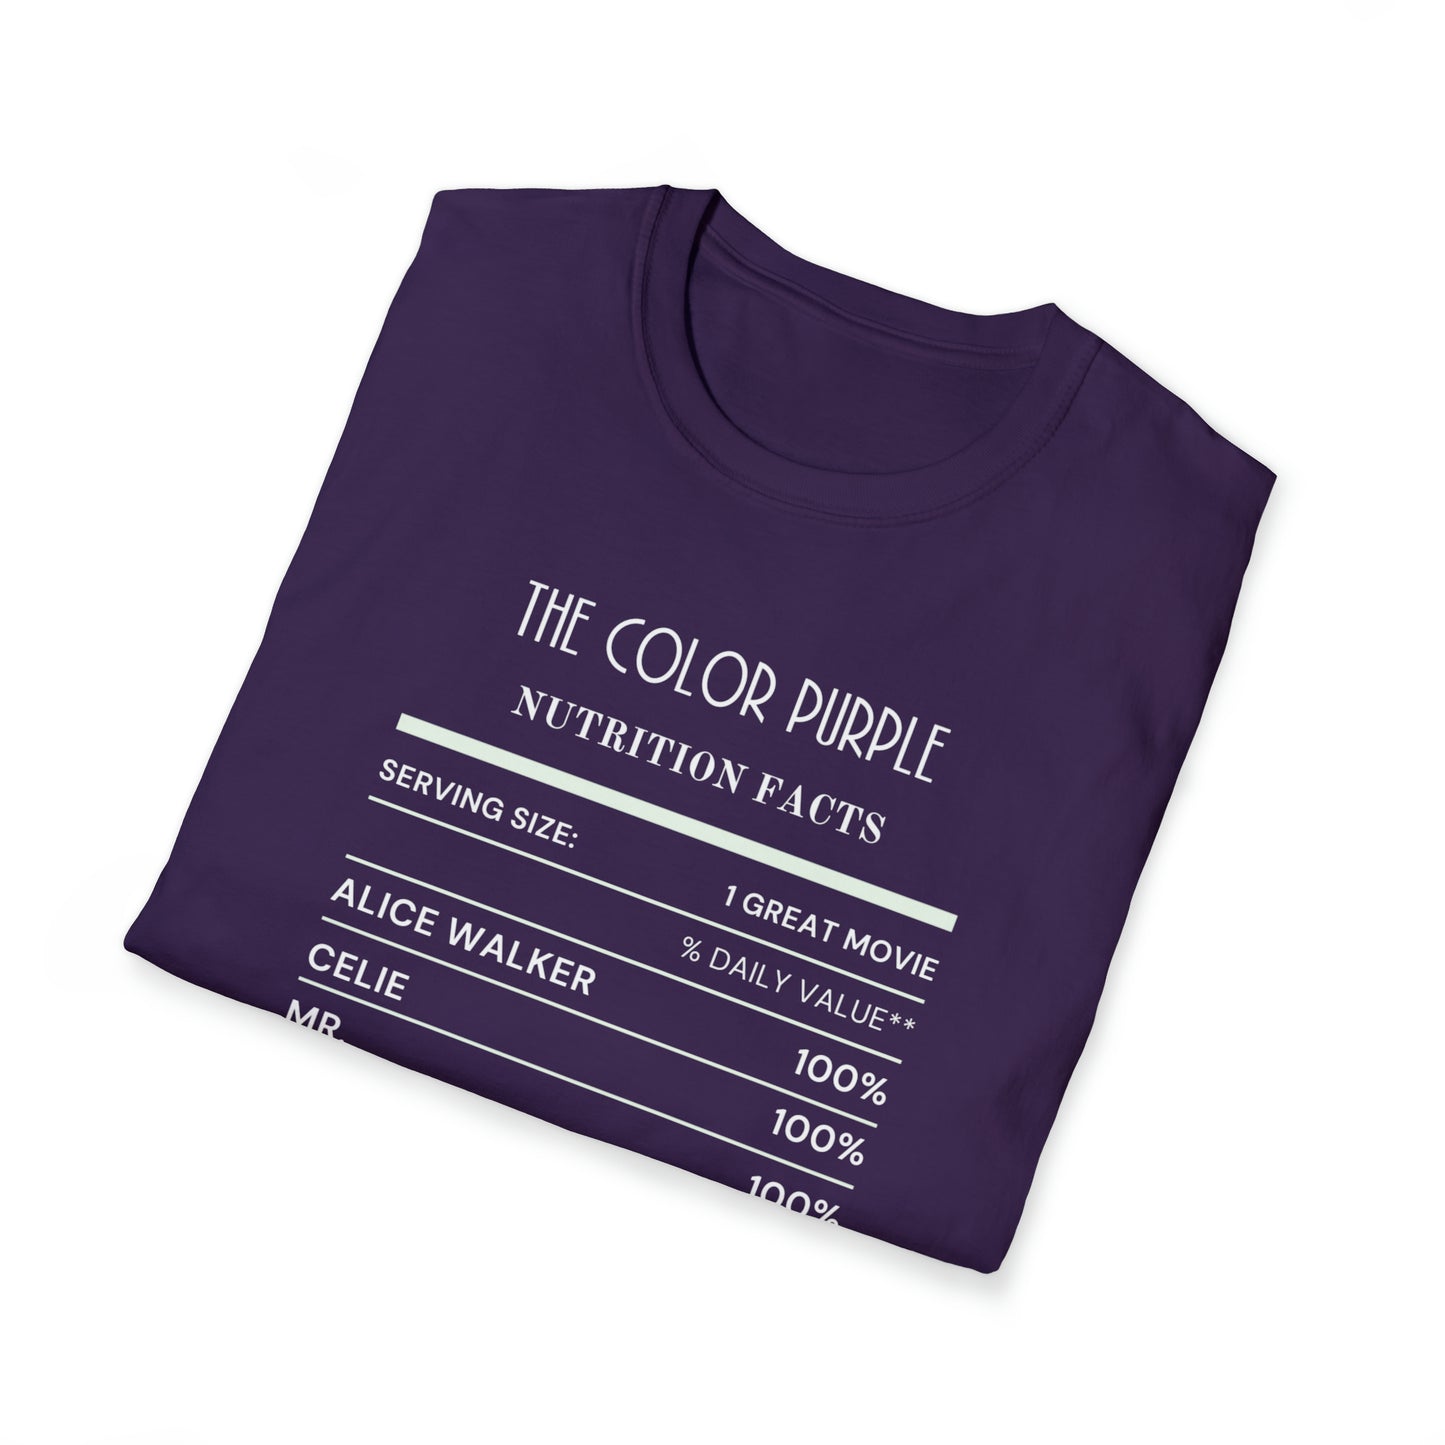 THE COLOR PURPLE Unisex Softstyle T-Shirt